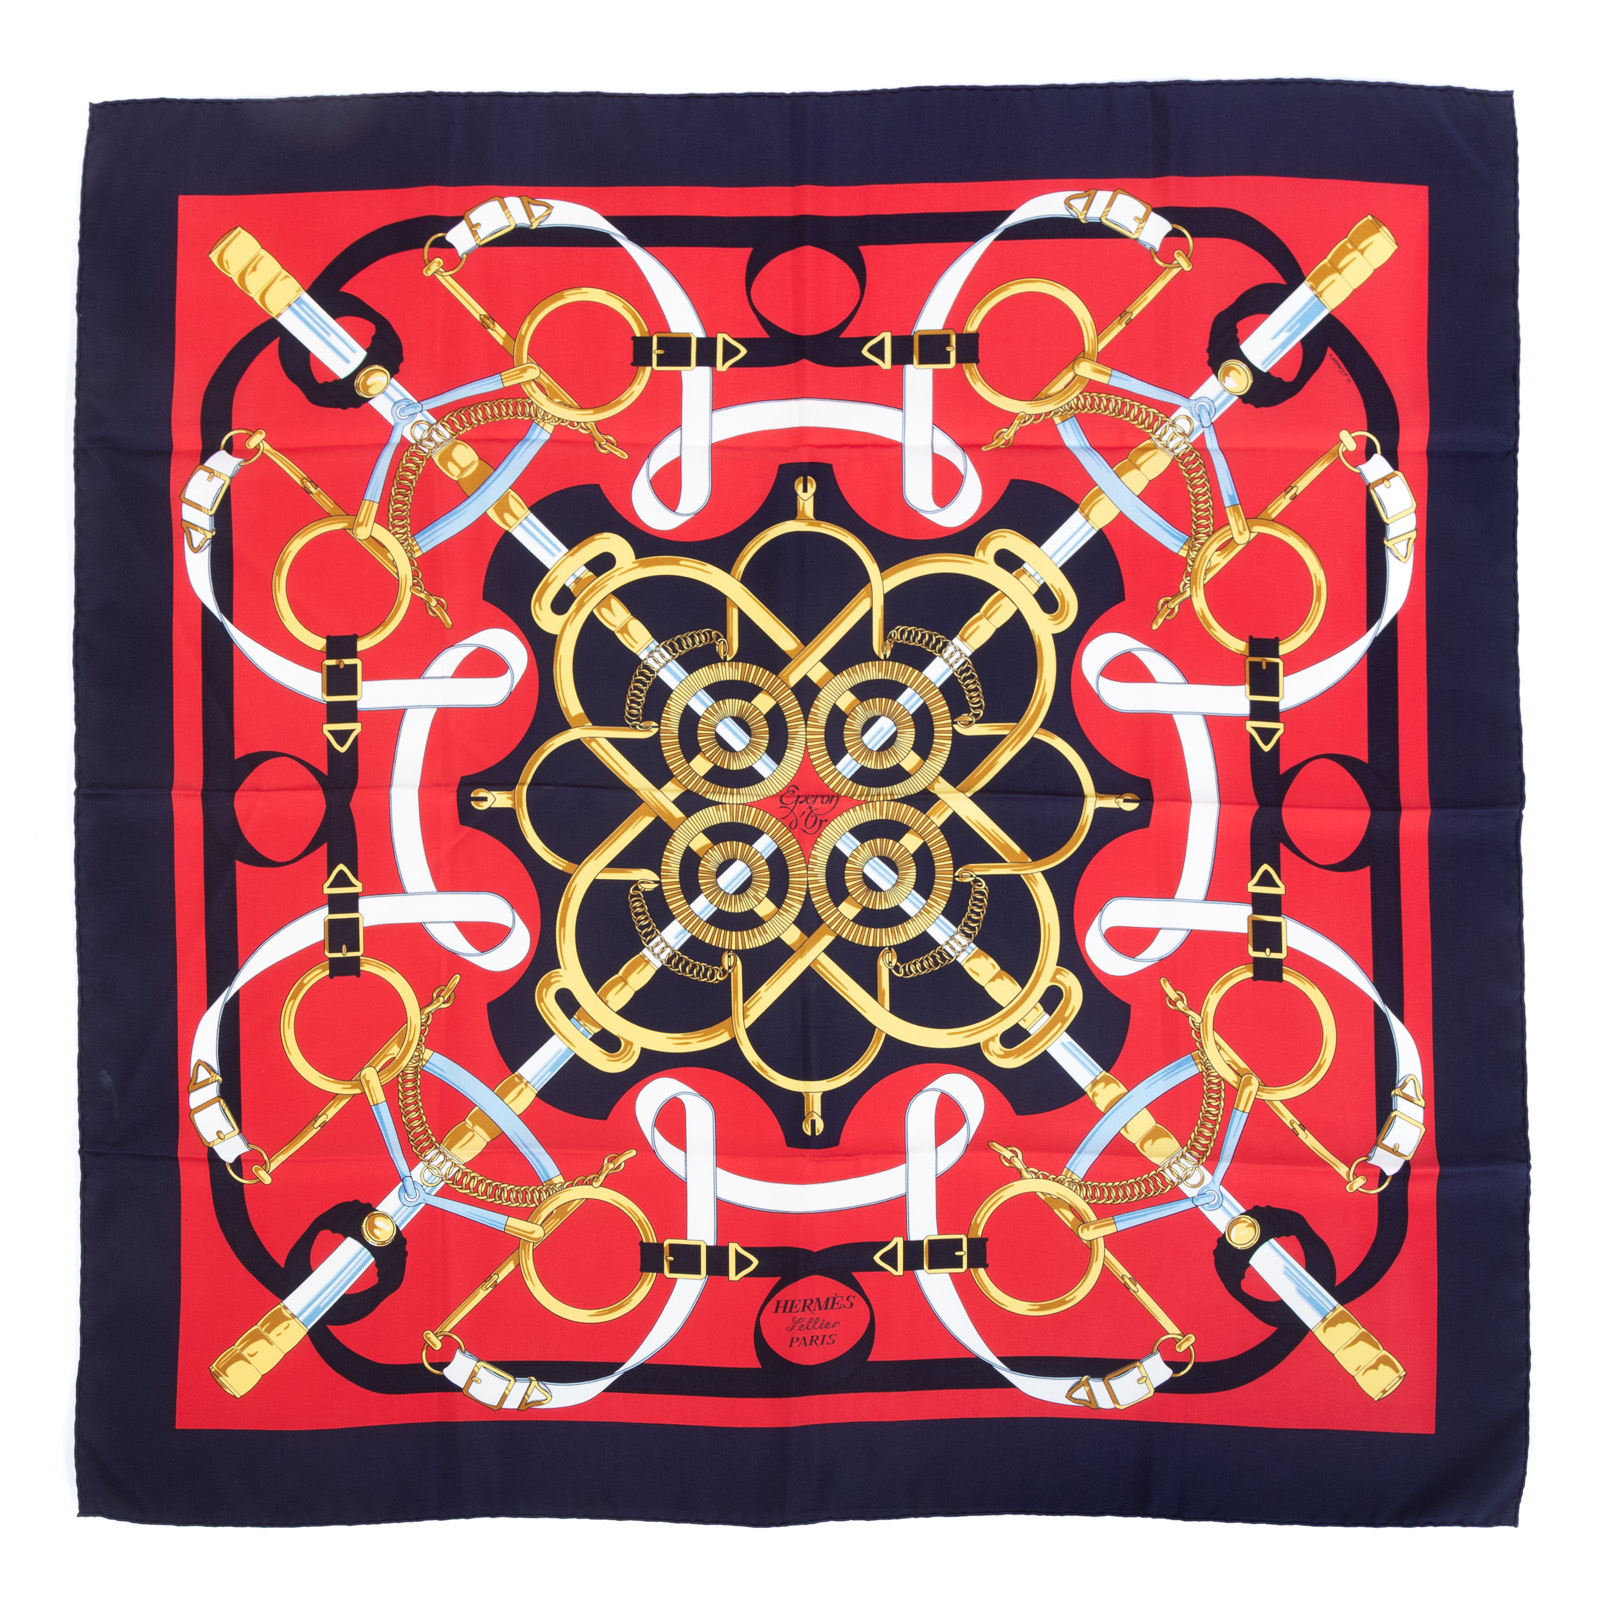 AN HERMES "EMPERON D'OR" SCARF